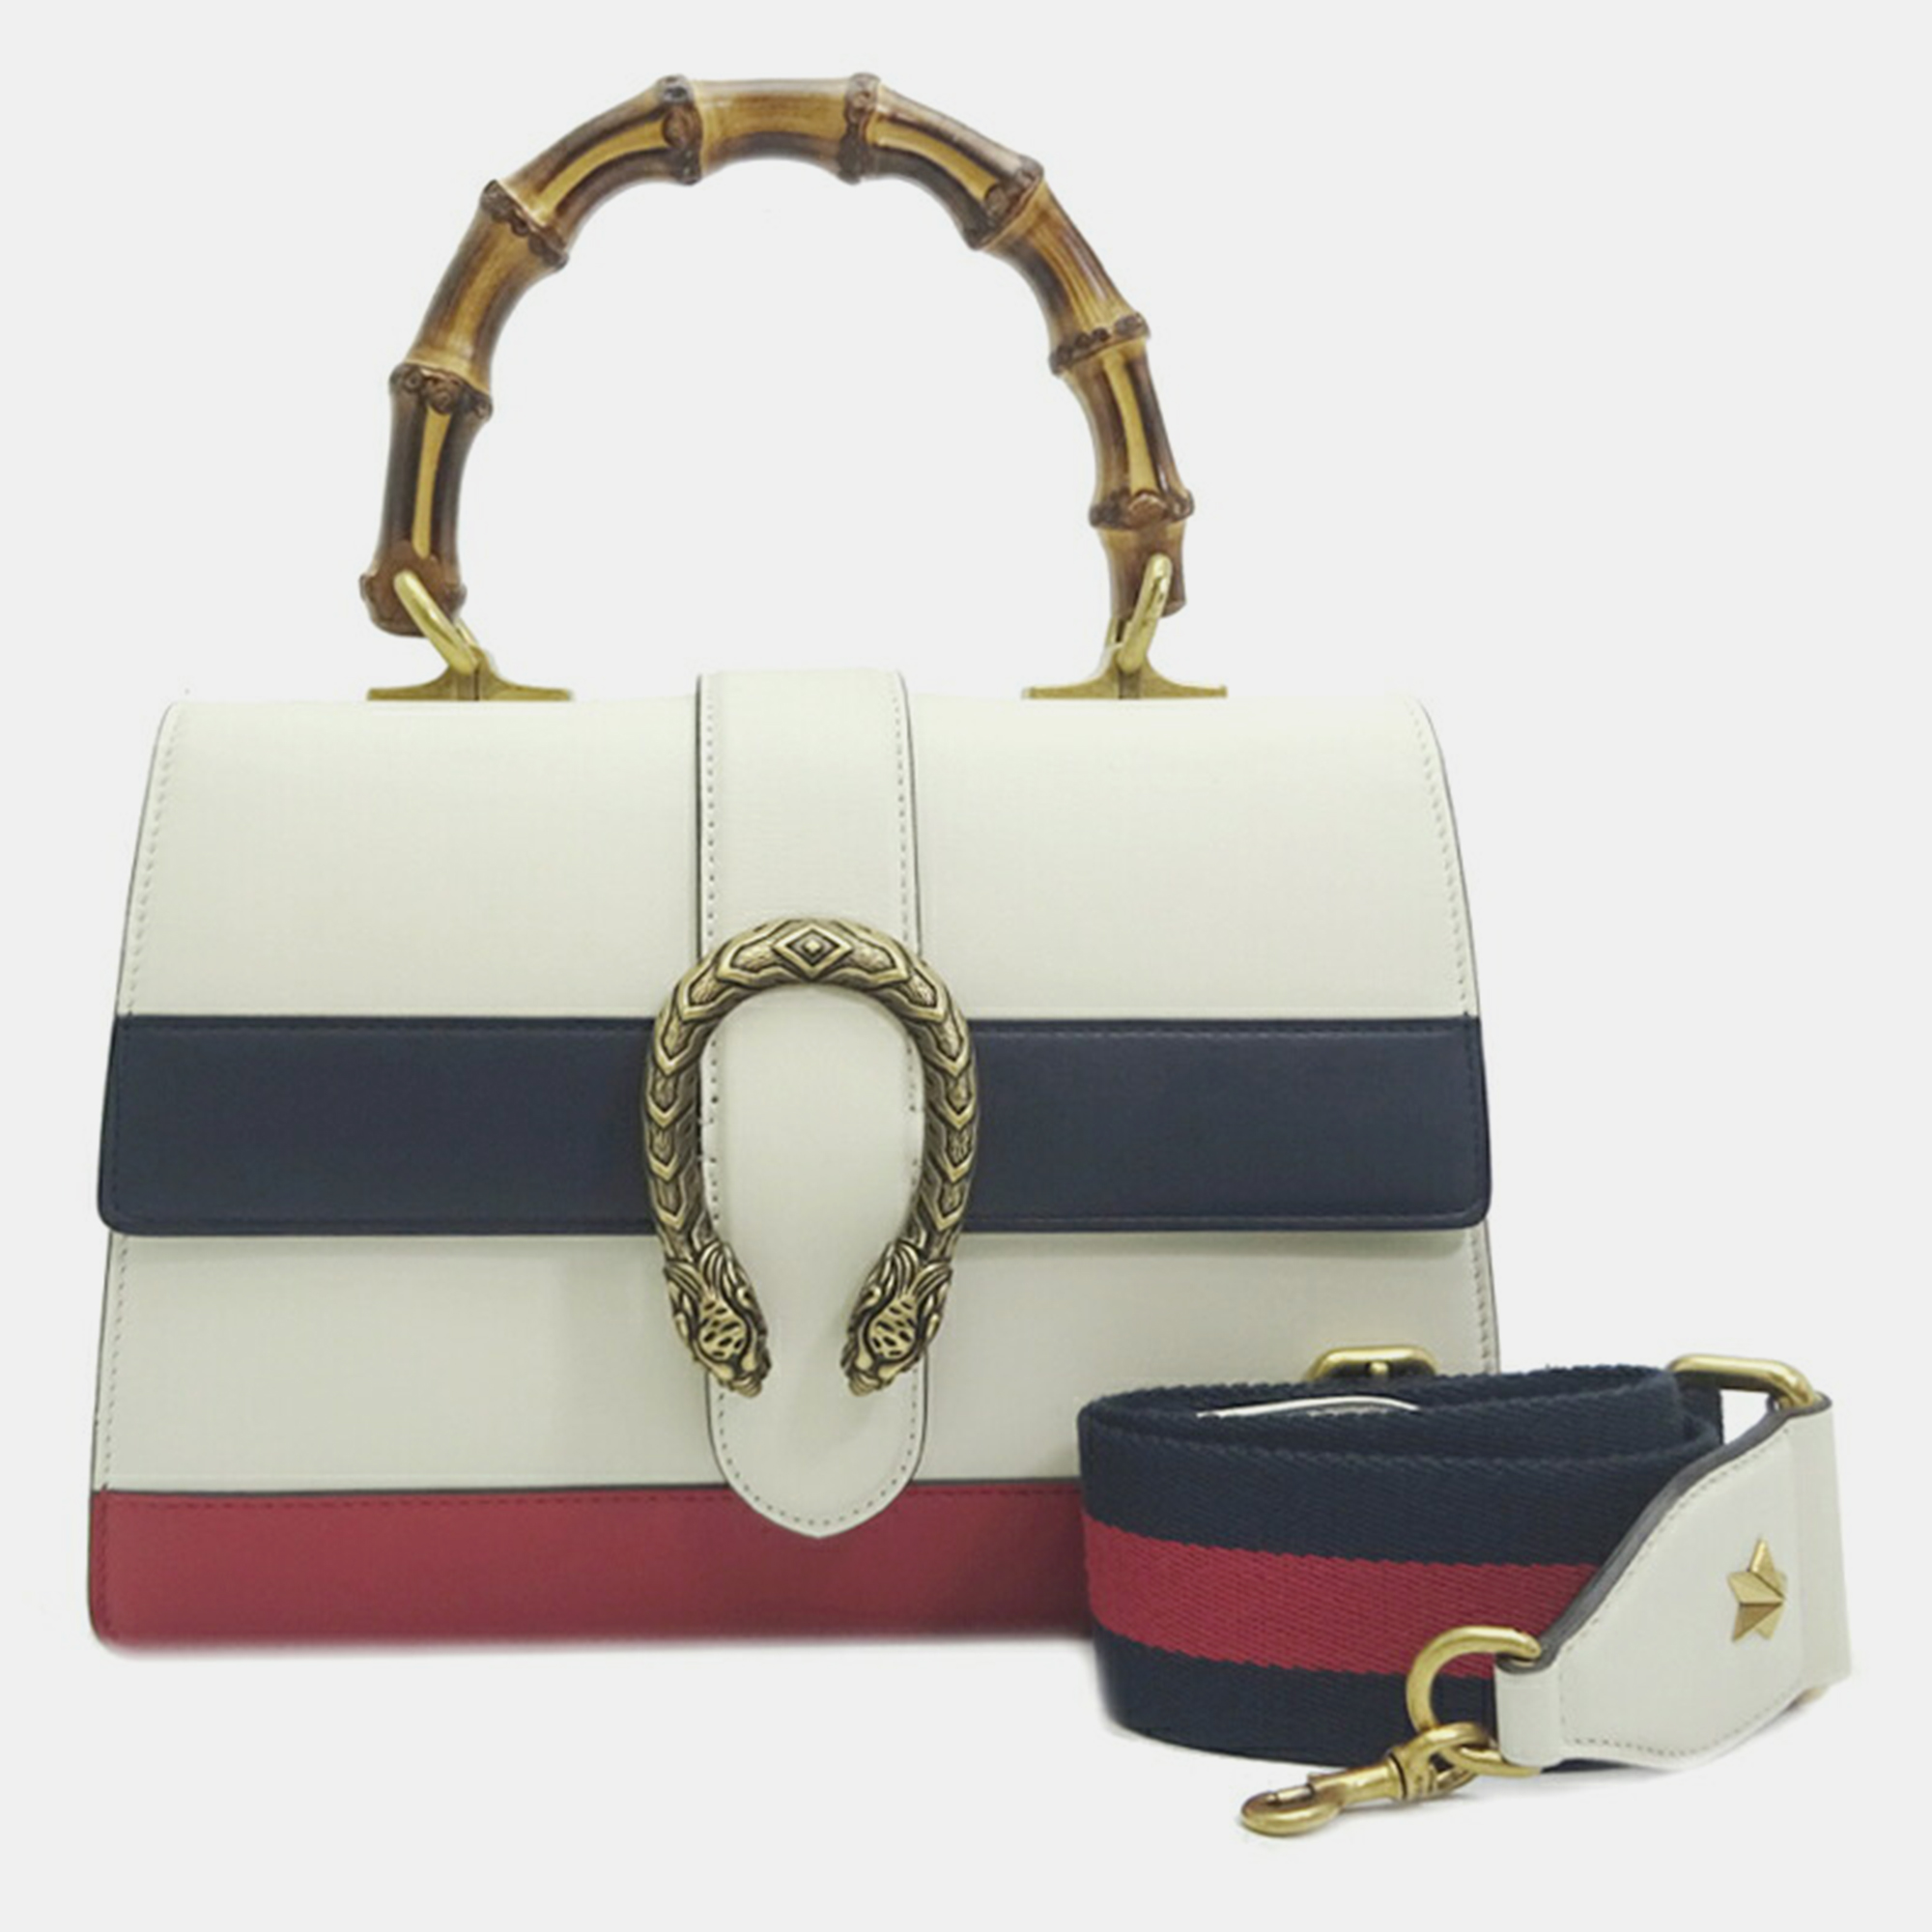 Gucci white leather dionysus top handle bag